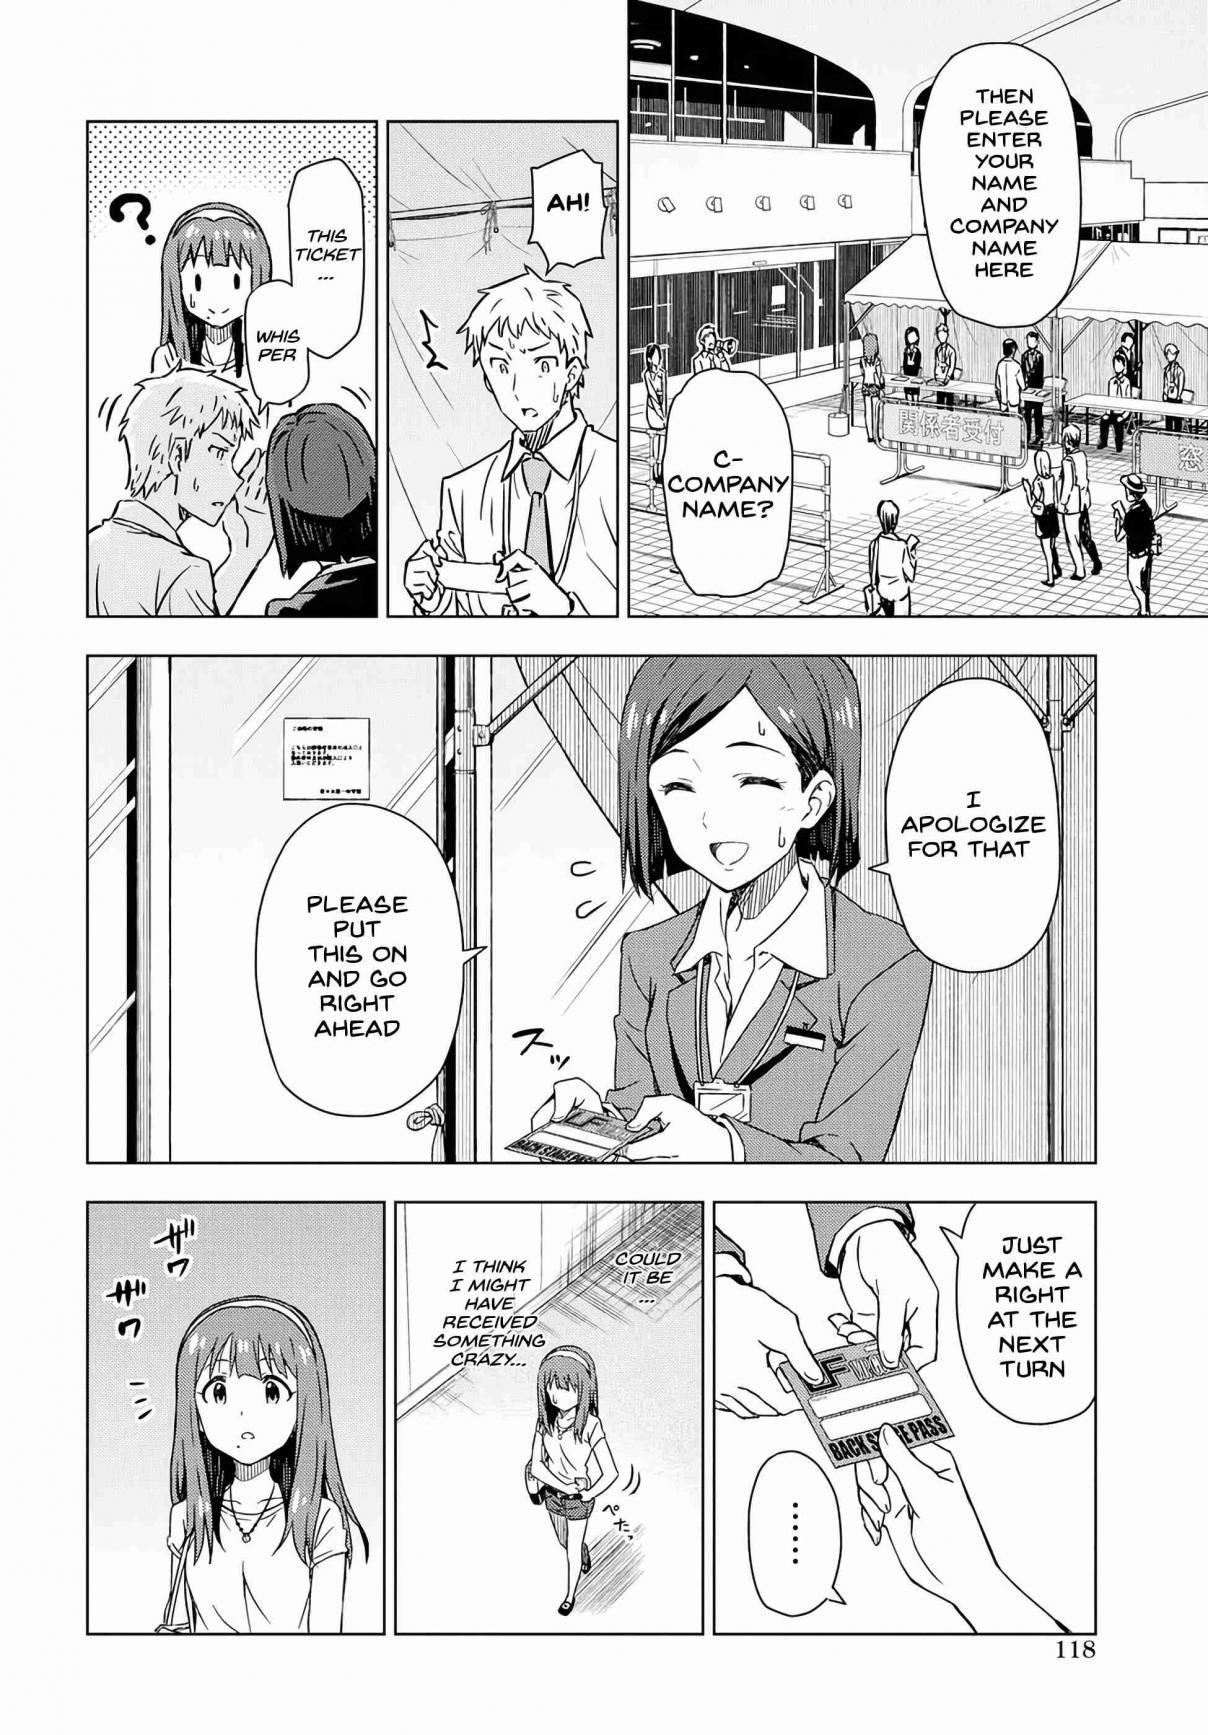 THE iDOLM@STER: Asayake wa Koganeiro Ch. 8 Approaching the Truth About Her Mother